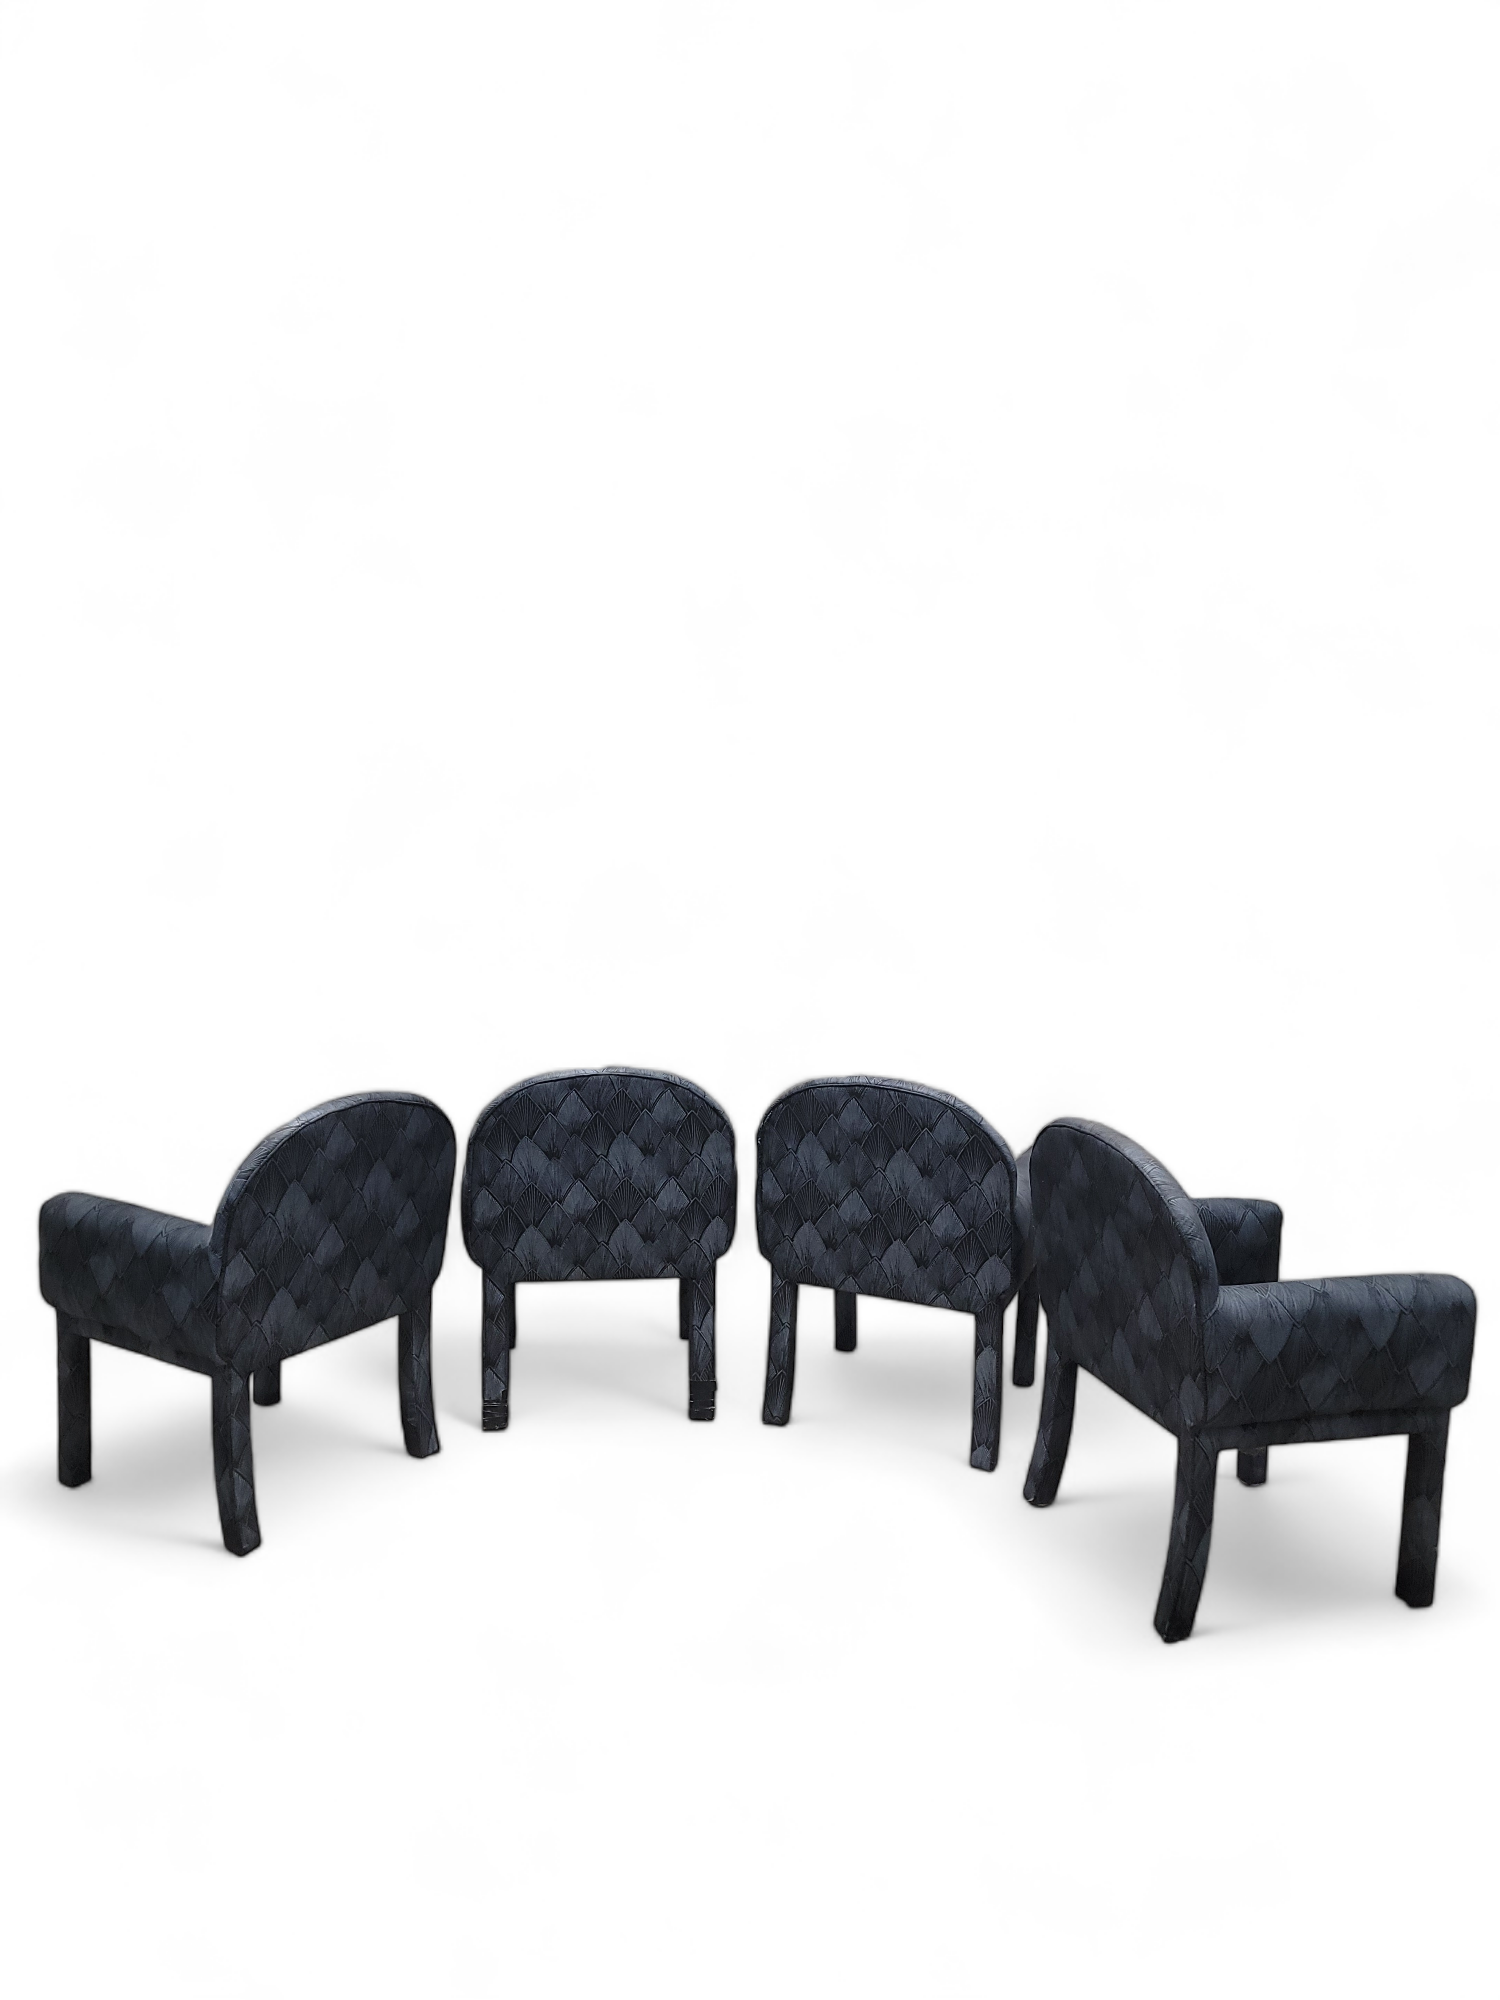 NEW - Post-Modern Deco Styled Set of 8 Arch-Back Original Fully Upholstered Dining Chairs